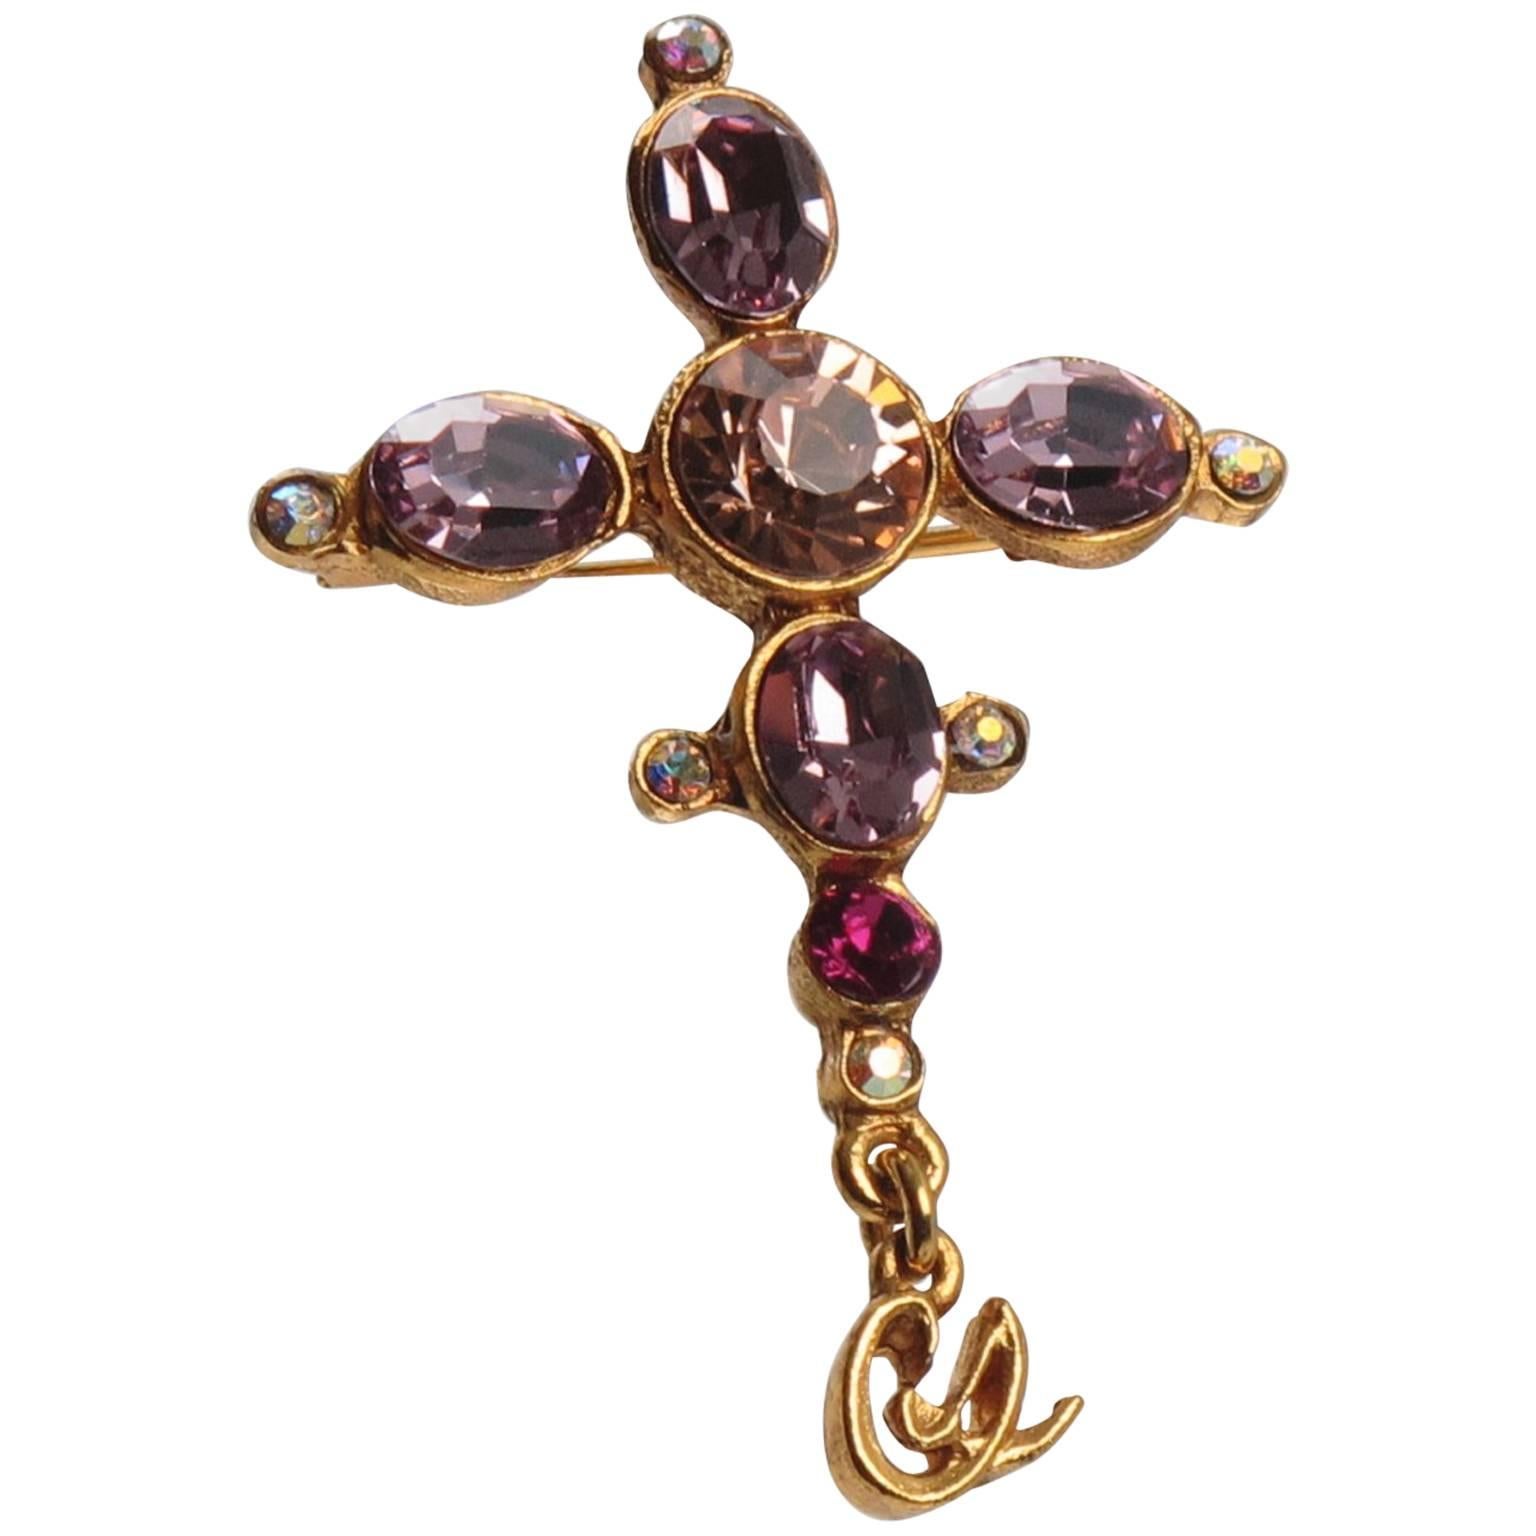 Christian Lacroix Paris Signed Vintage Jeweled Cross Pin Brooch